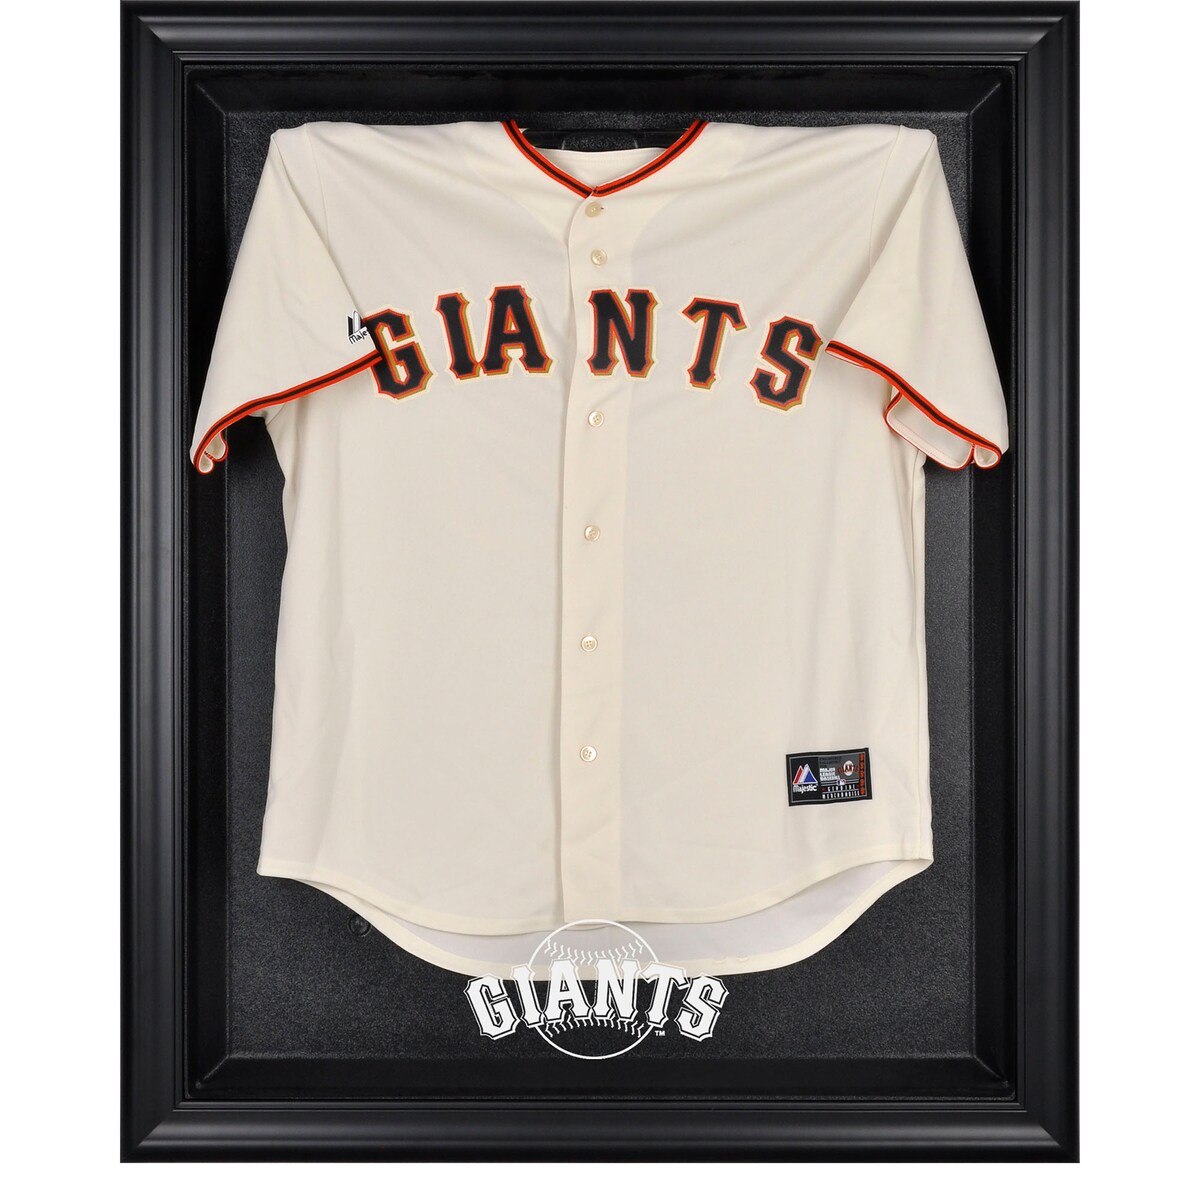 The San Francisco Giants black framed logo jersey display case opens on hinges and is easily wall-mounted. It comes with a 24" clear acrylic rod to display a collectible jersey. This case is constructed with a durable, high-strength injection mold backing, encased by a beautiful wood frame and features an engraved team logo on the front. Officially licensed by Major League Baseball. The inner dimensions of the case are 38" x 29 1/2"x 3" with the outer measurements of 42" x 34 1/2" x 3 1/2". Memorabilia sold separately.Wood frameMade in the U.S.A.ImportedHas a LogoEasily wall mountedCollectible jersey display caseBrand: Fanatics AuthenticEngraved team graphicsOfficially licensed MLB productMemorabilia sold separatelyHinges to open easilyOfficially licensedIncludes acrylic rod to hold jersey